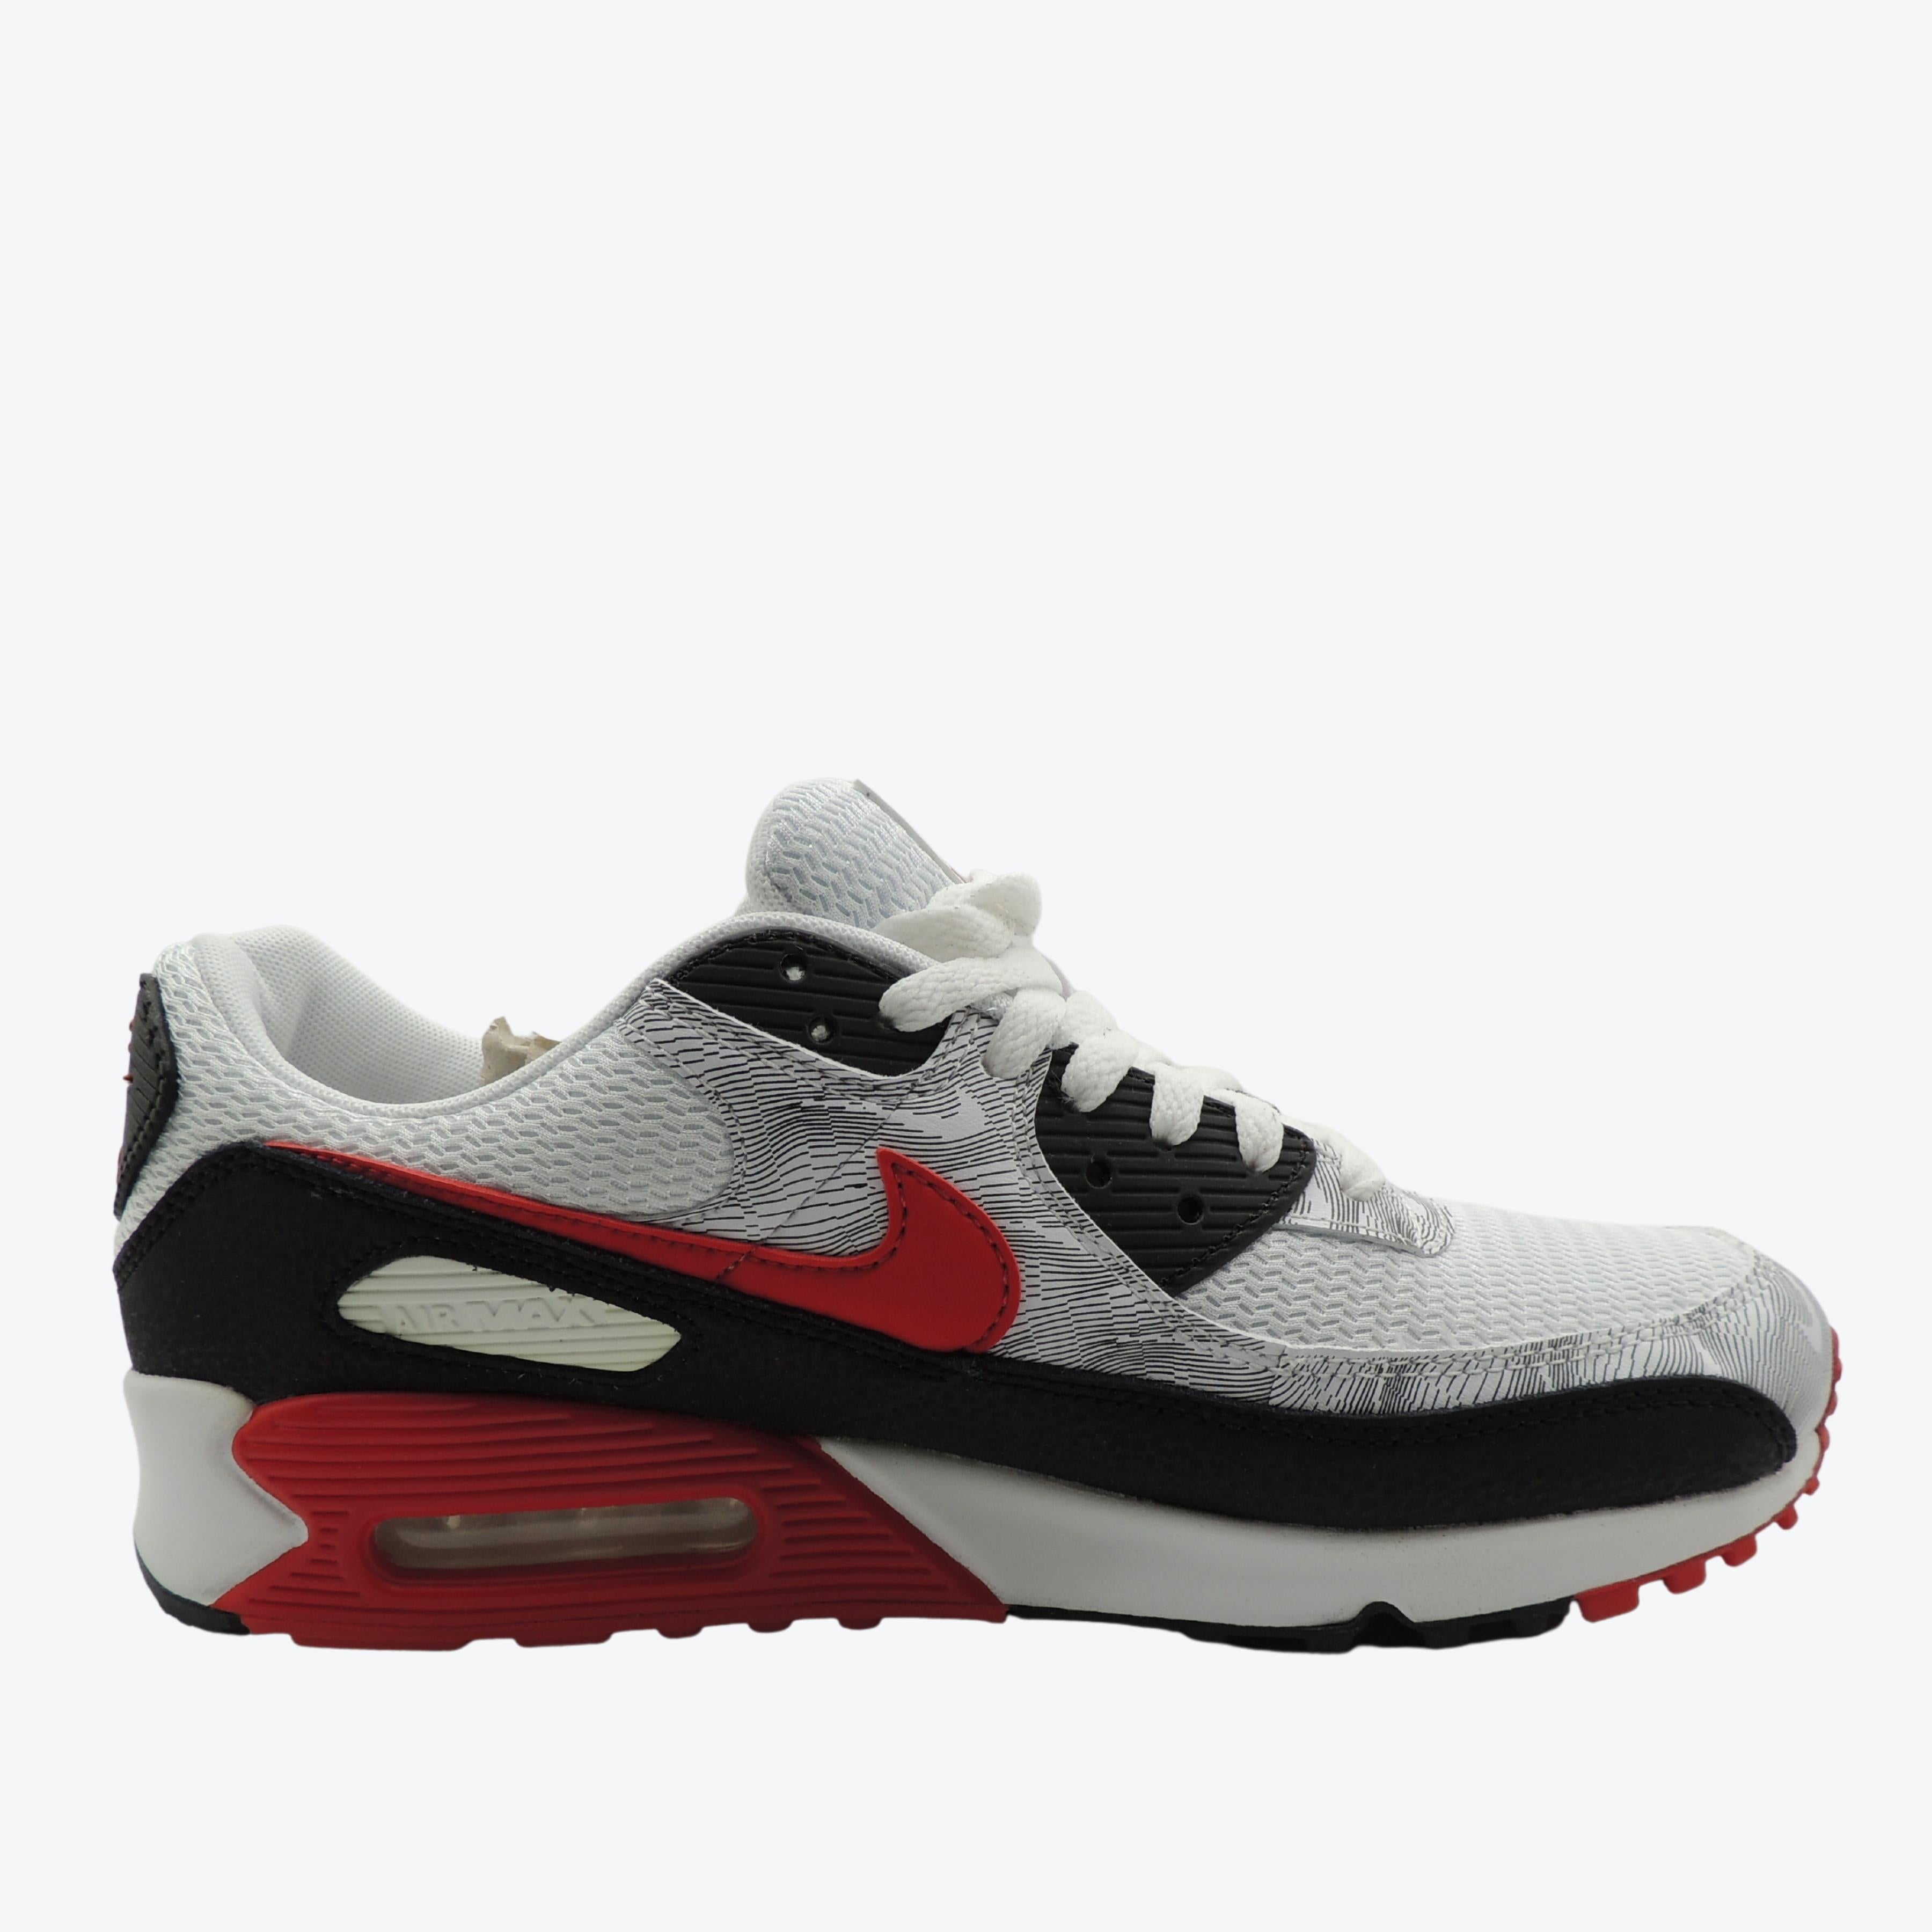 Nike Air Max 90 Topography In White/University Red UK 8.5